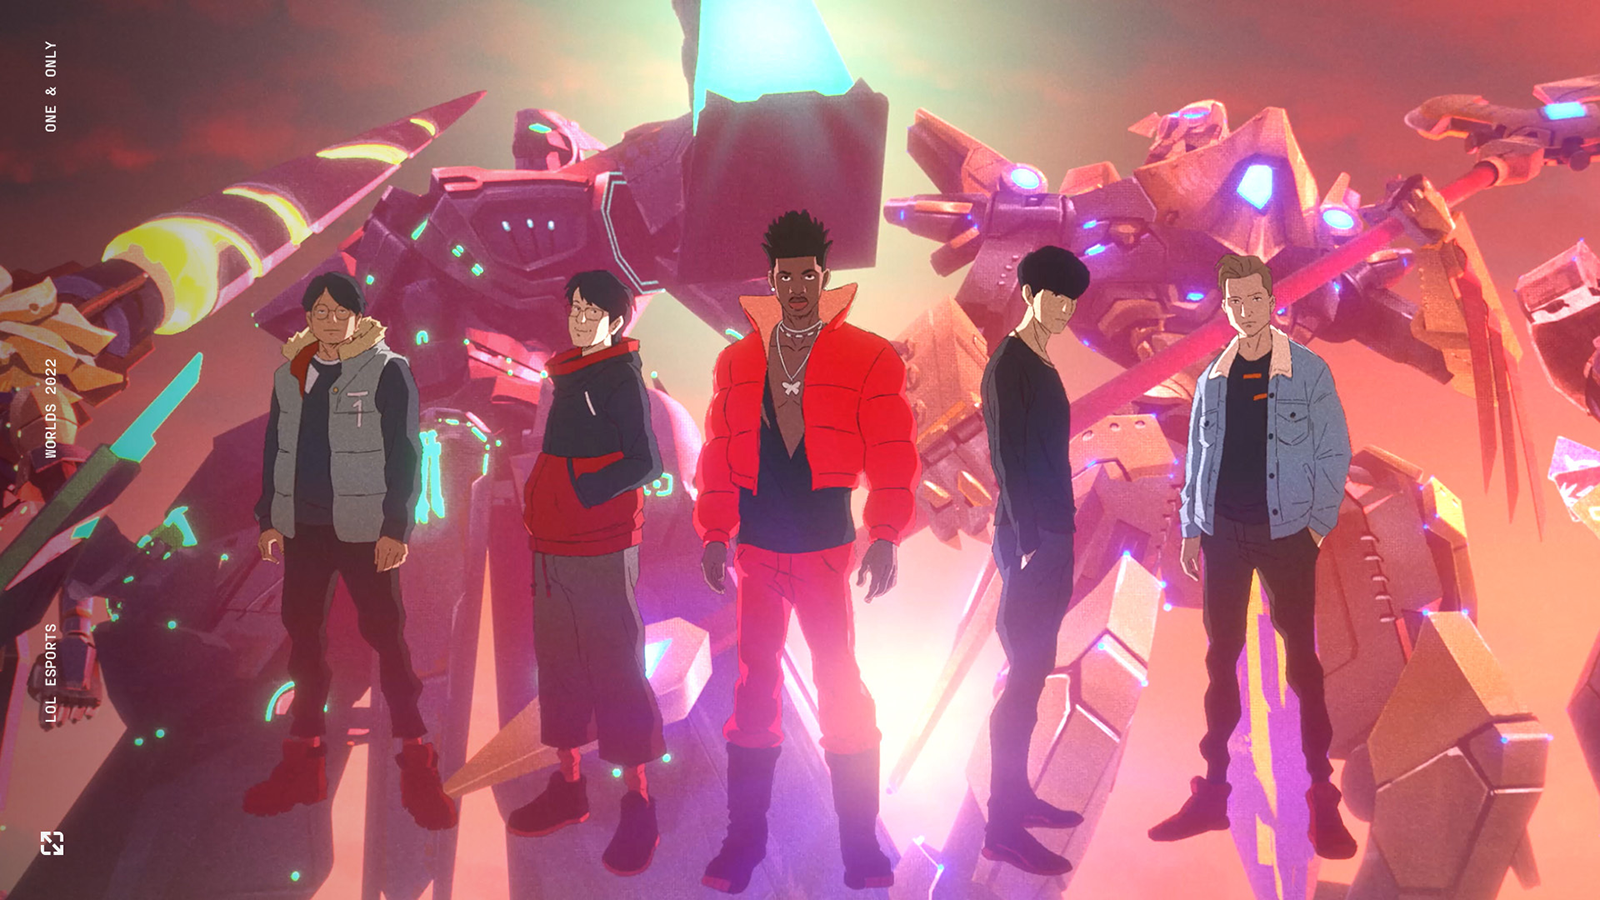 Lil Nas X and four League of Legends professional players stand in front of a series of massive mechs designed after champions from the game, including Azir, Thresh, Rell, and Twisted Fate.